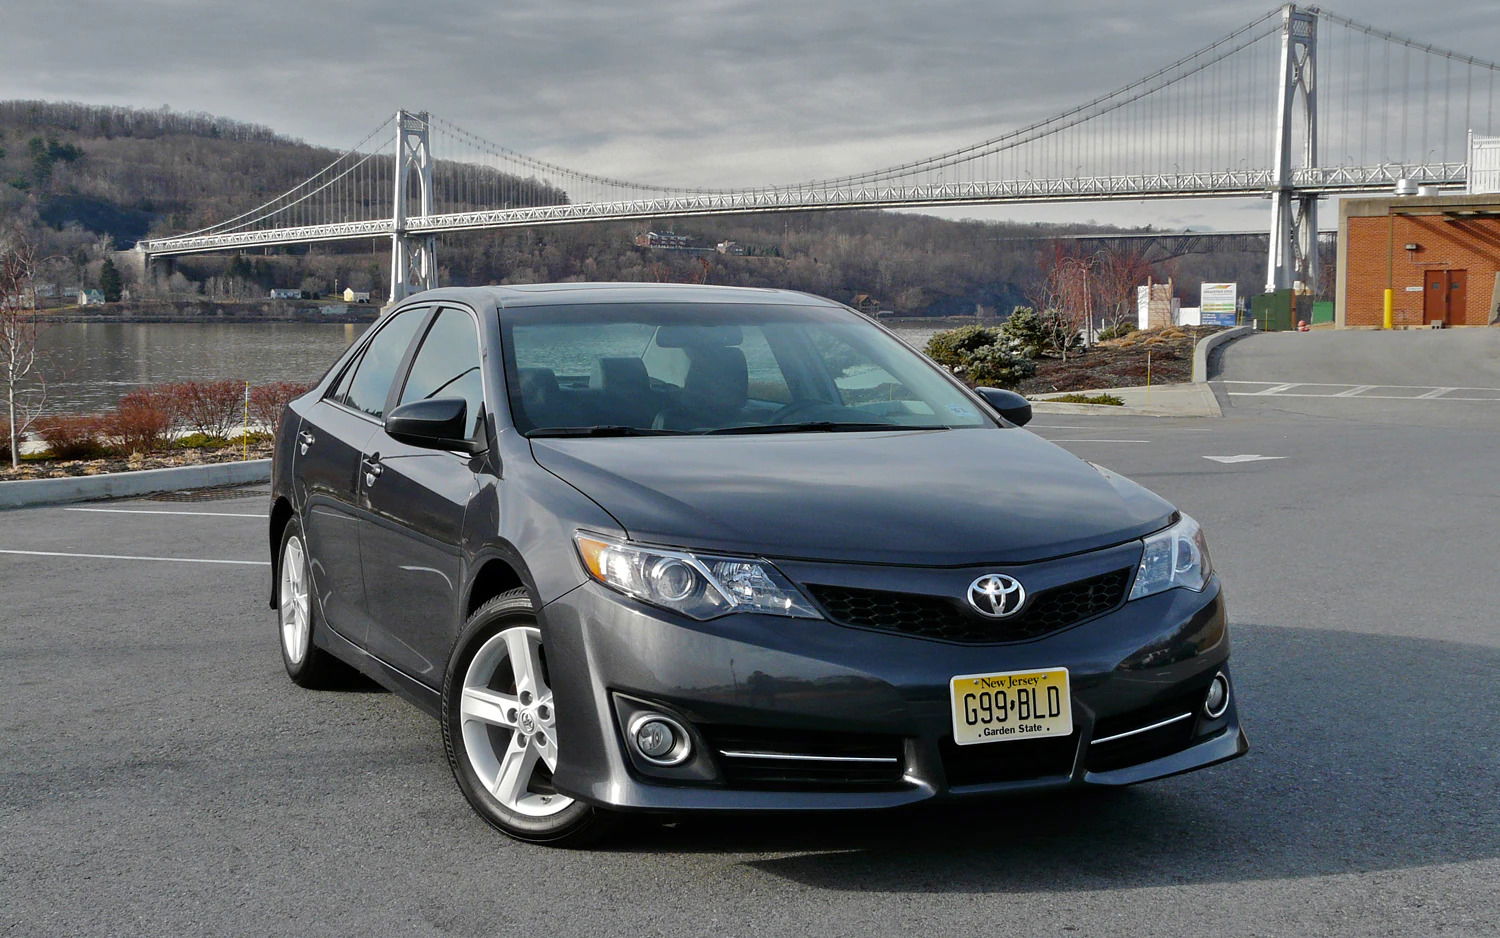 2012-toyota-camry-front-right-view suspension system Via MotorTrend.